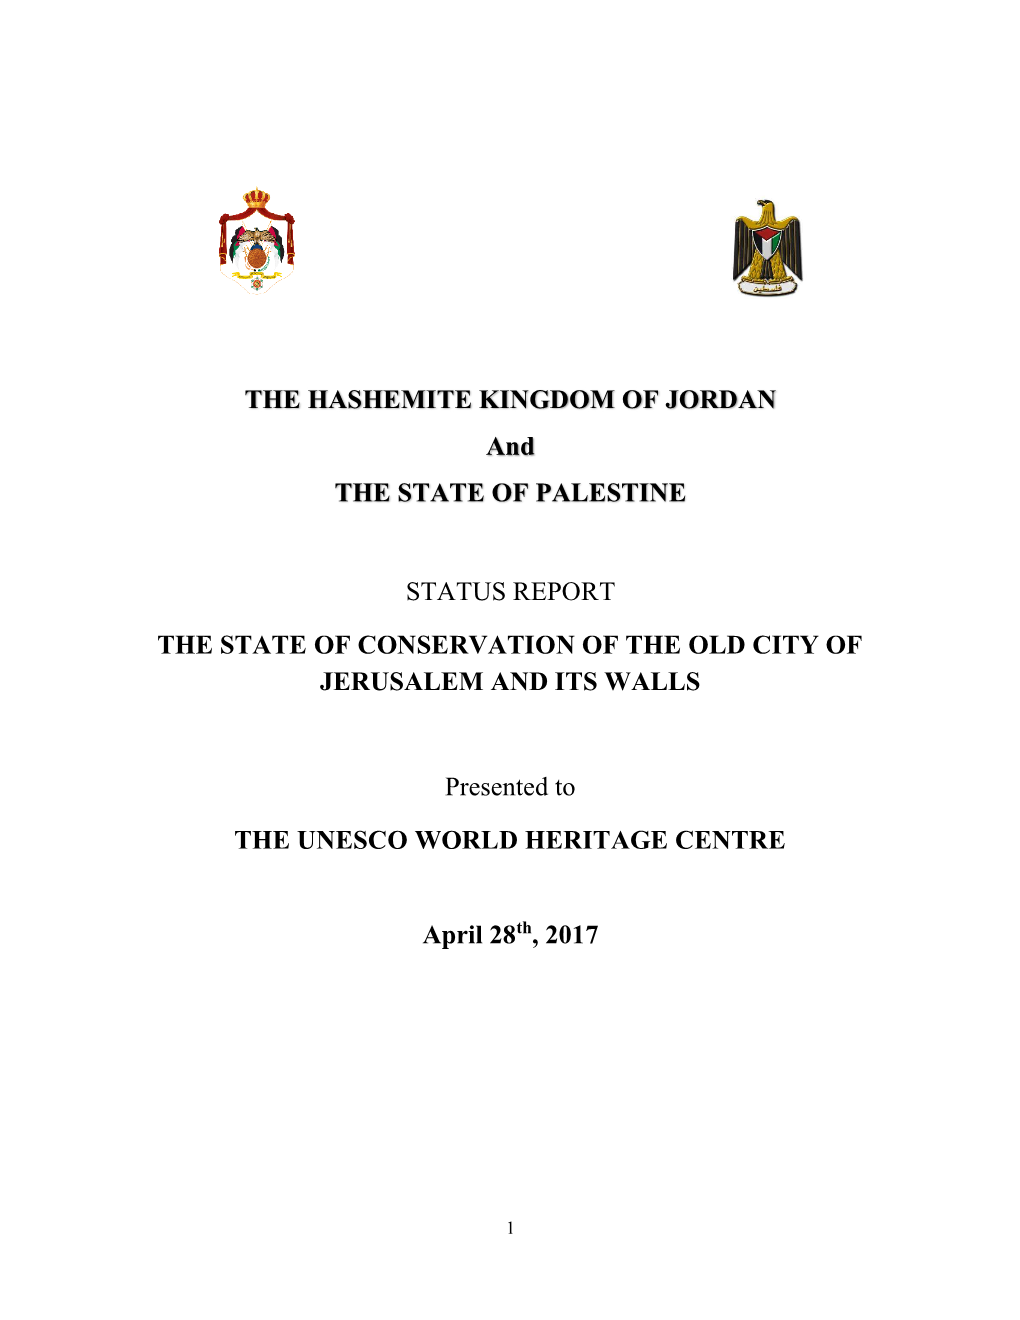 THE HASHEMITE KINGDOM of JORDAN and the STATE of PALESTINE